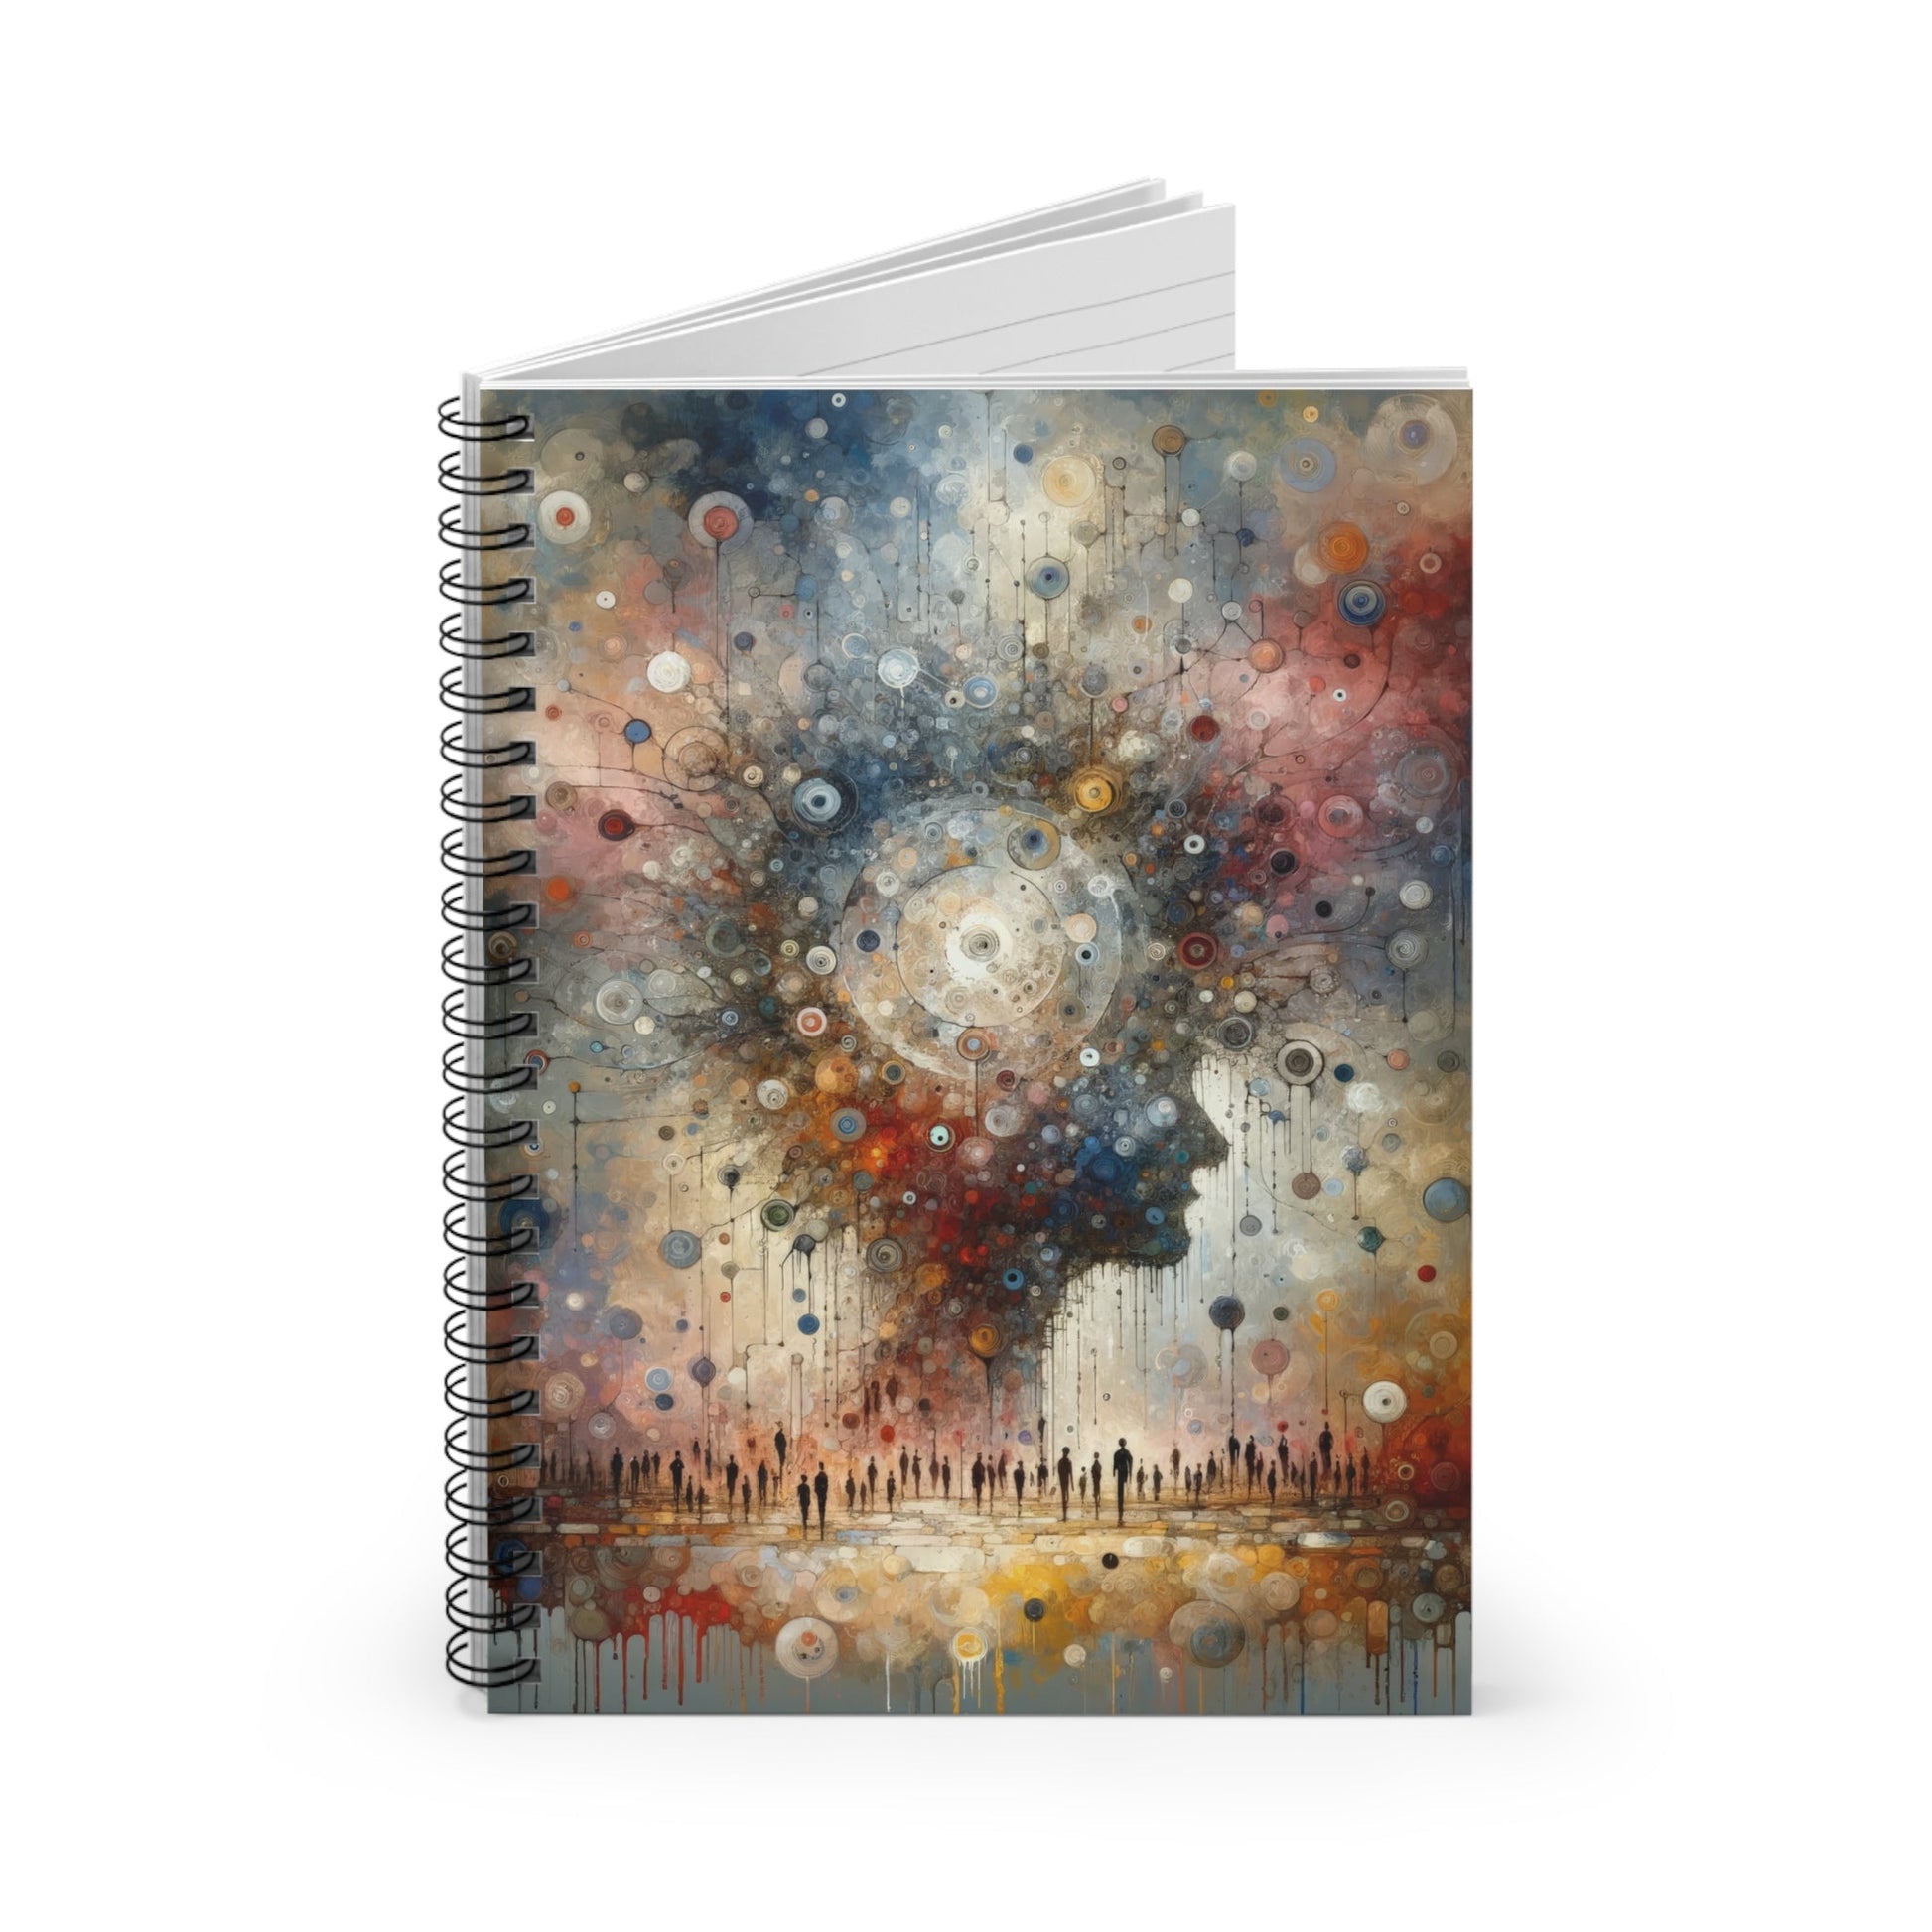 Shared Existence Solace Spiral Notebook - Ruled Line - ATUH.ART